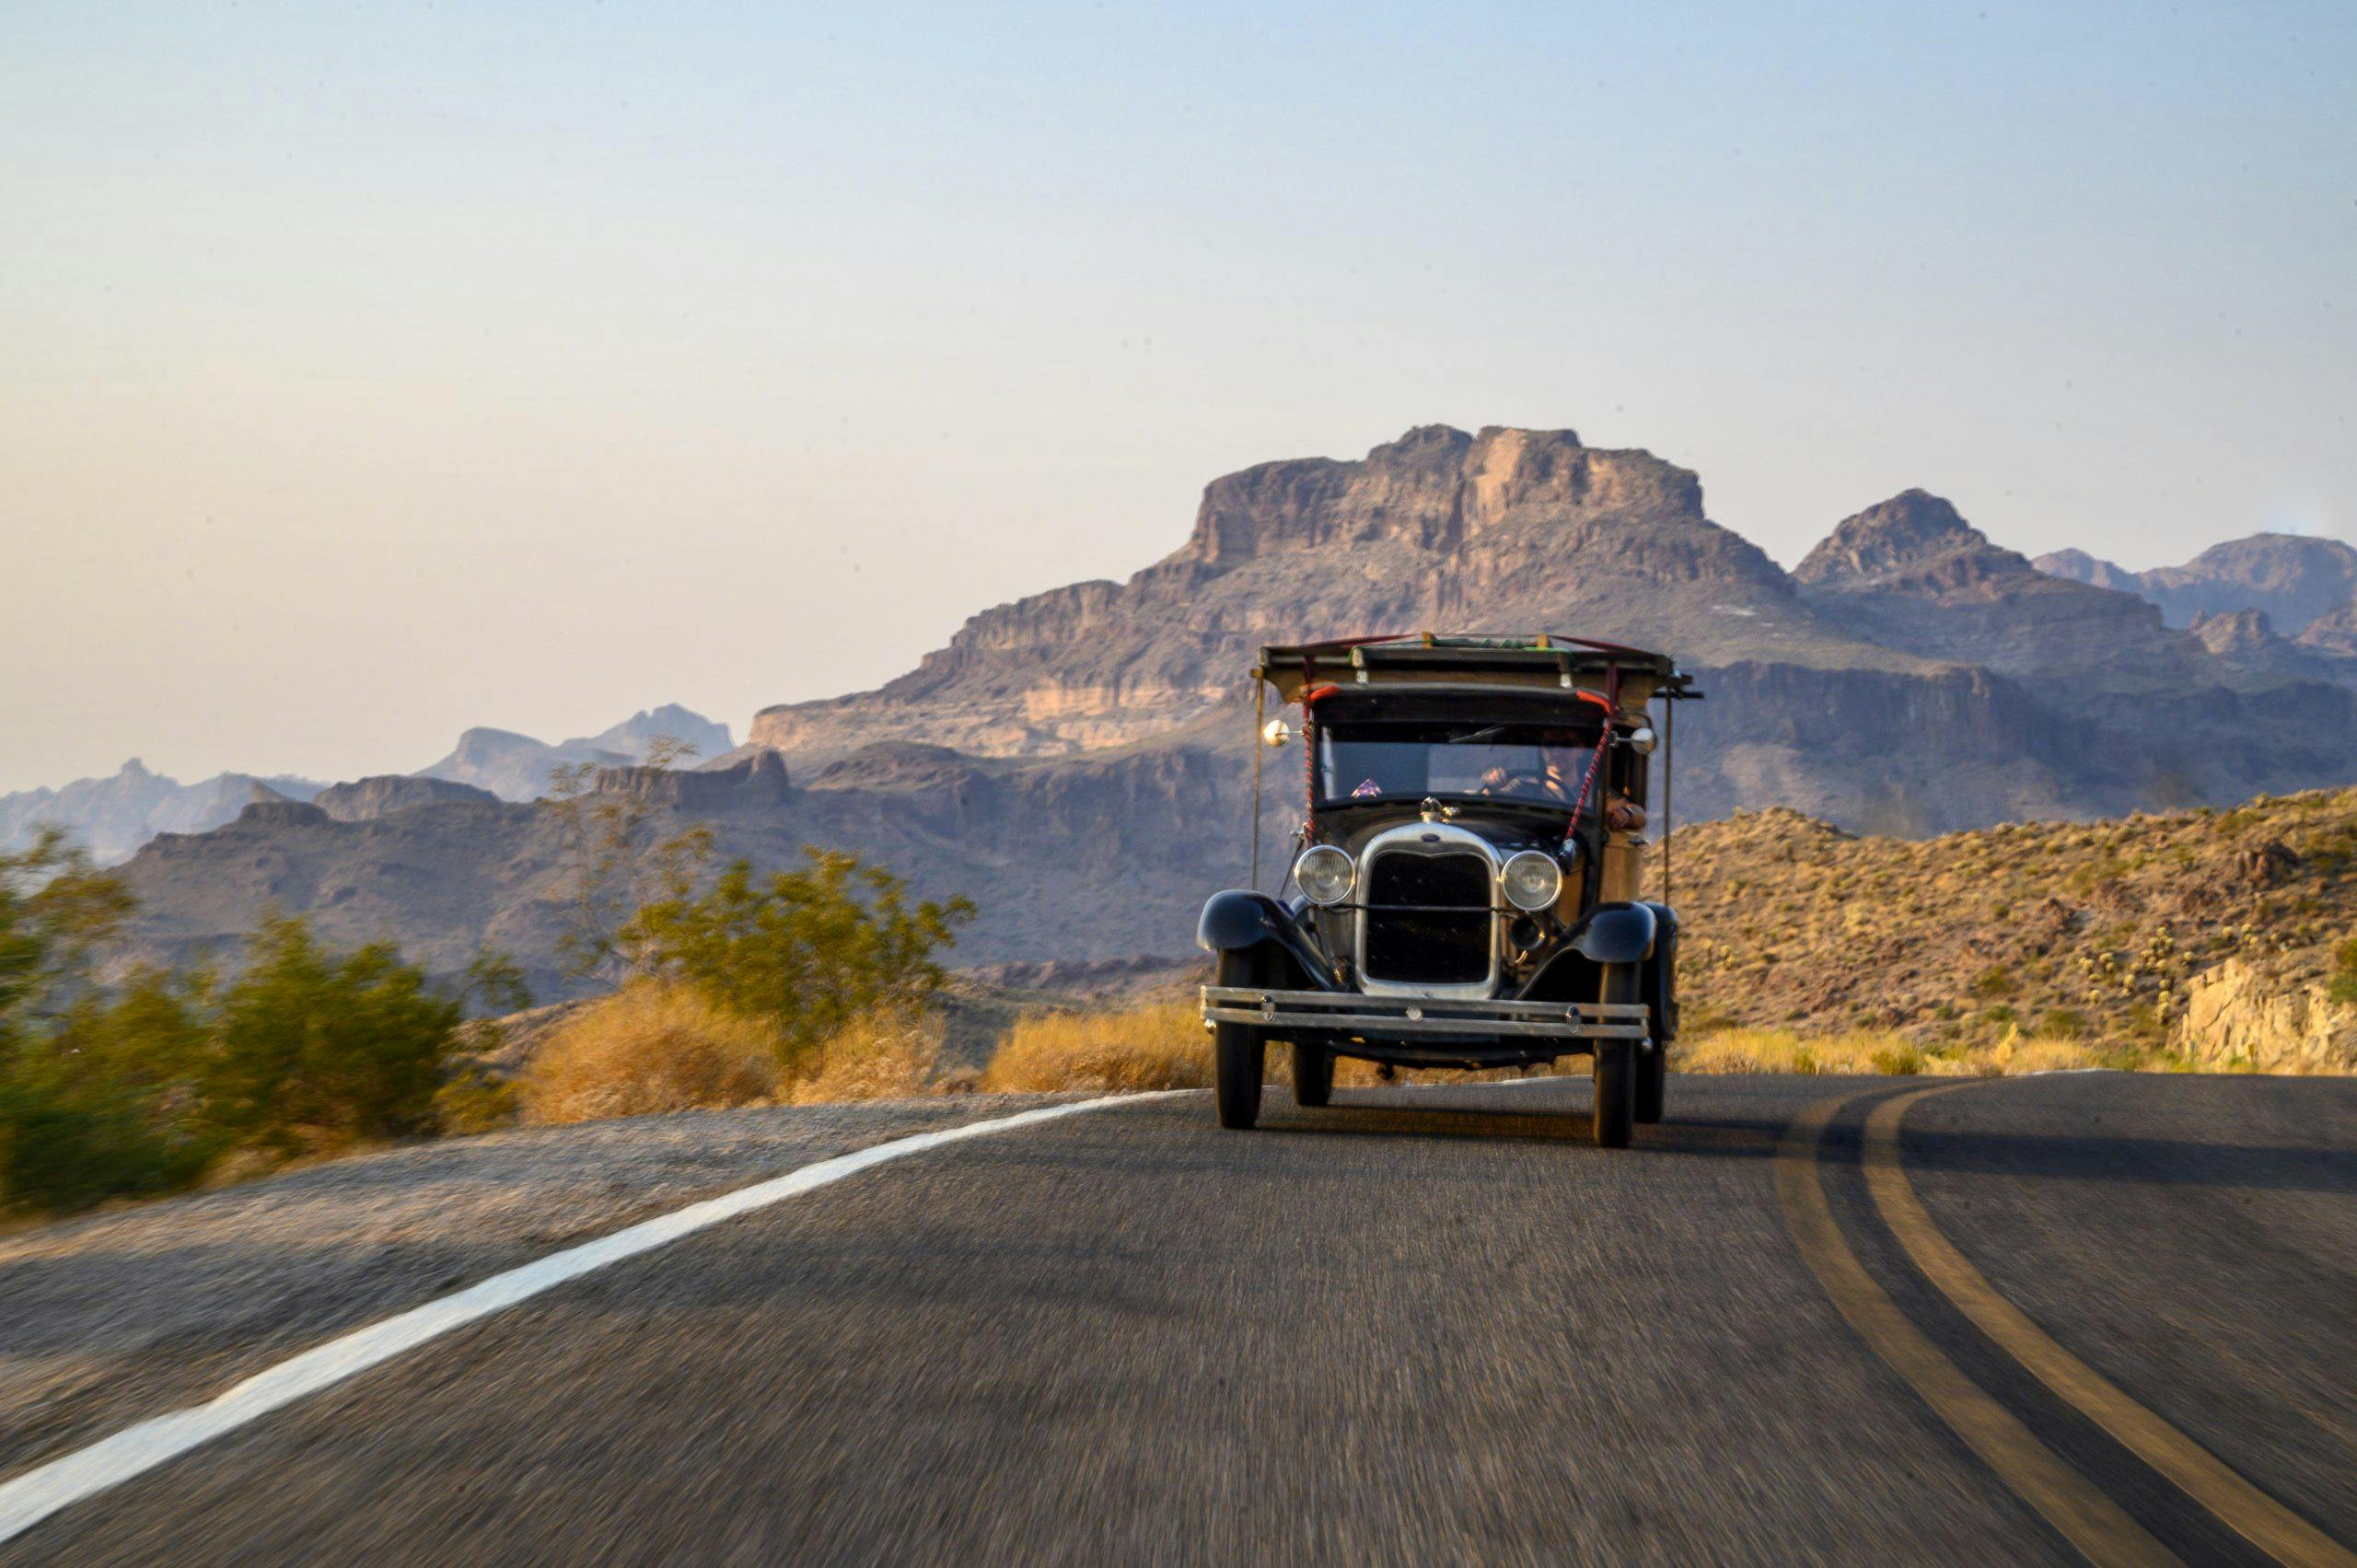 1929 Model A on Route 66